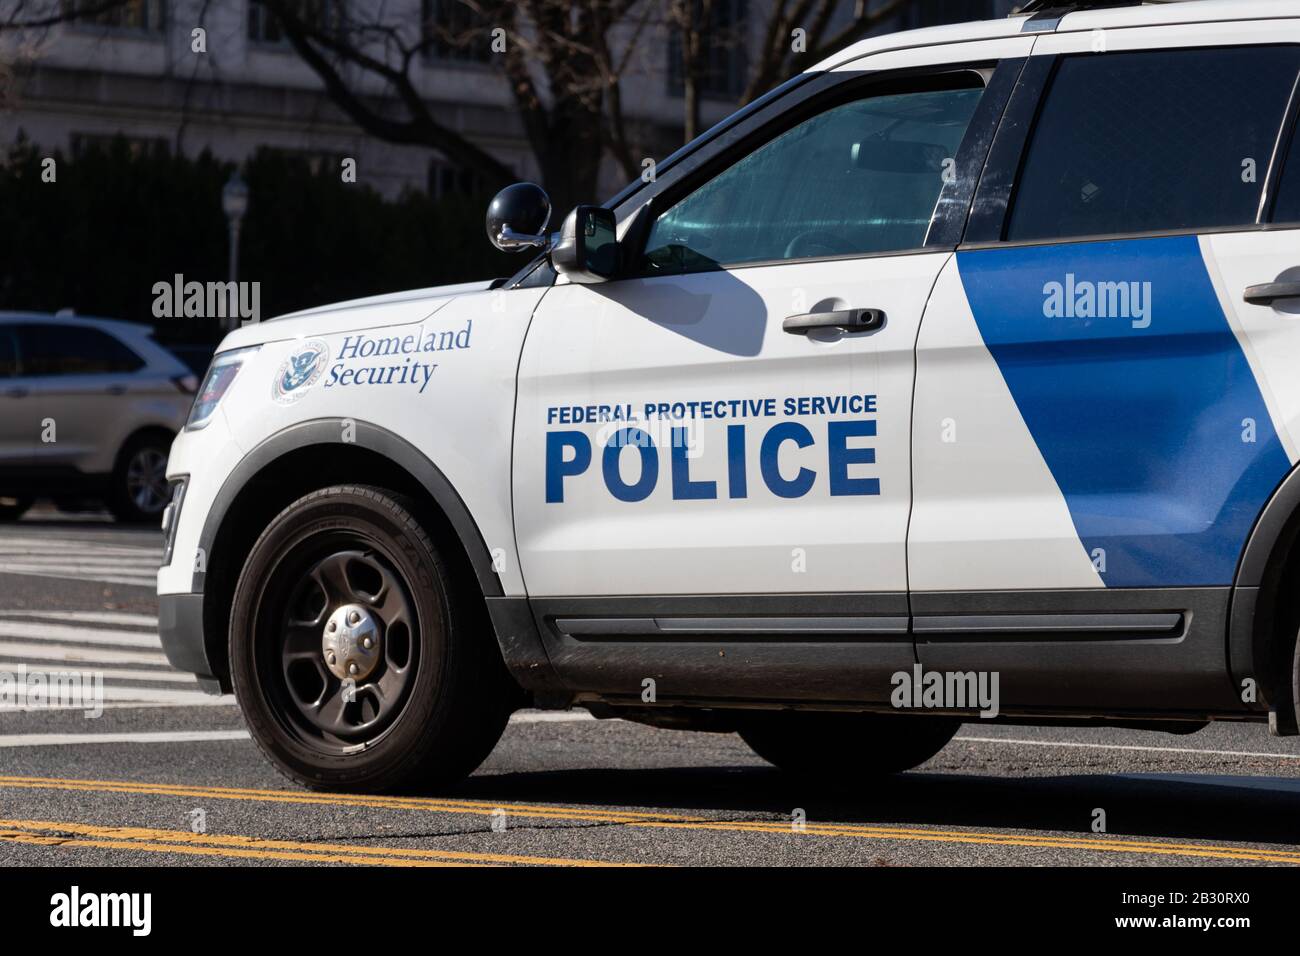 Federal Protective Service Police car on the streets on Washington, D.C. Stock Photo